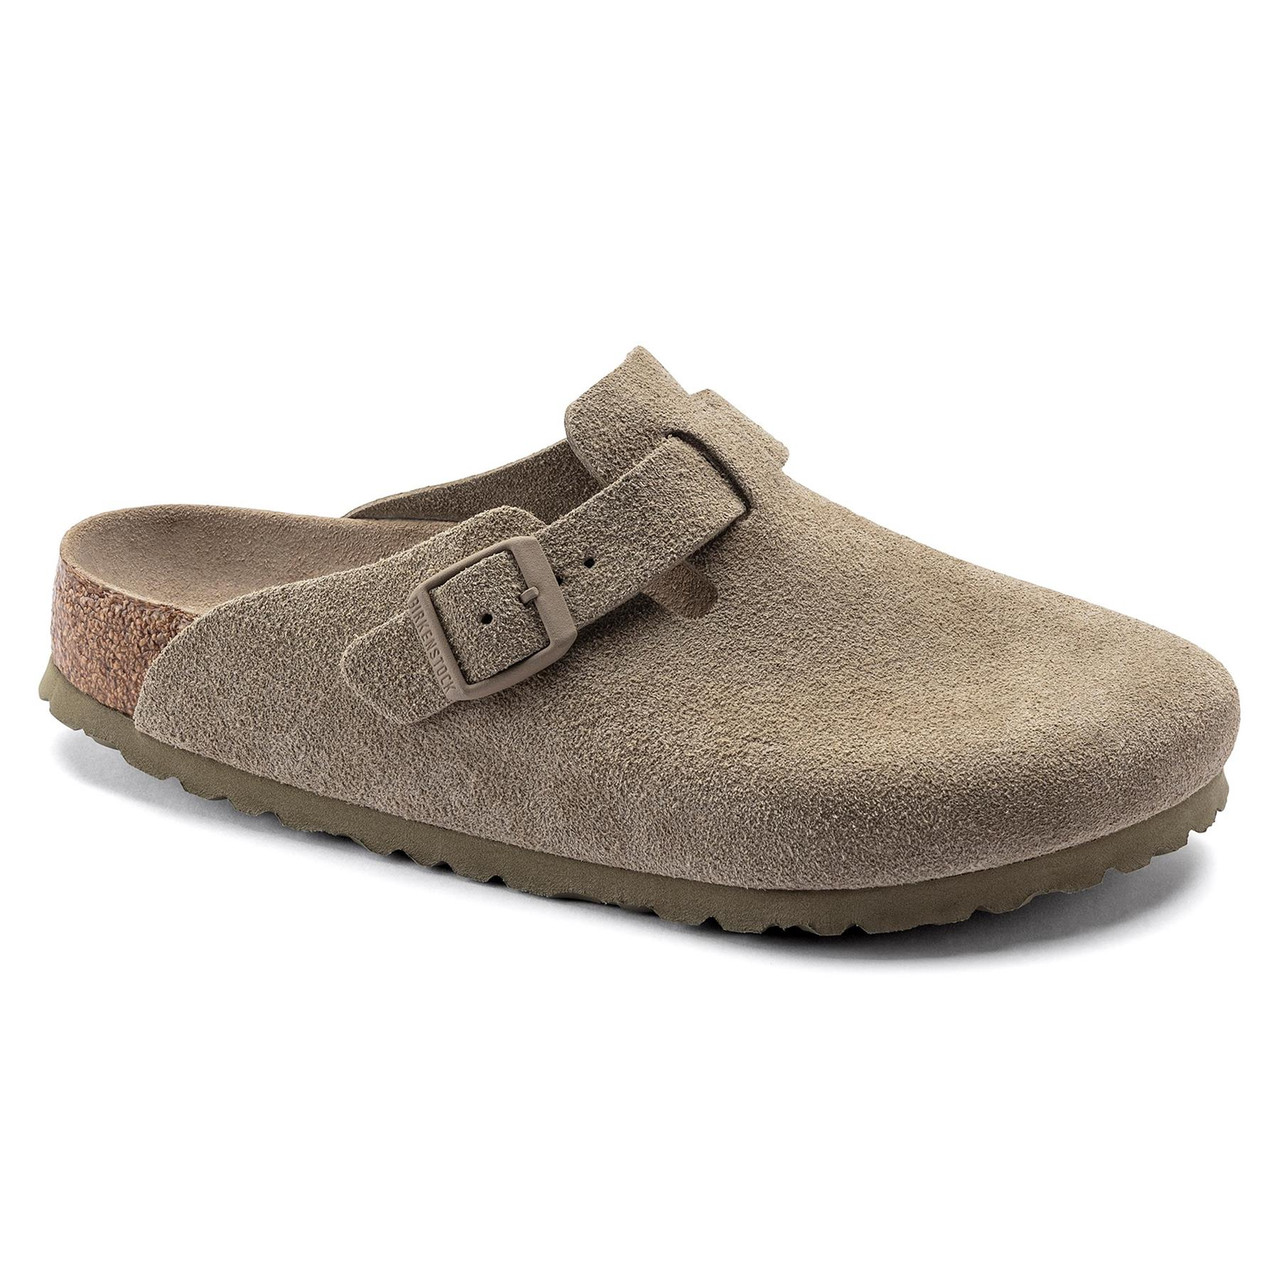 In which country are the Birkenstock Boston Soft Footbed Suede Leather Clogs manufactured?